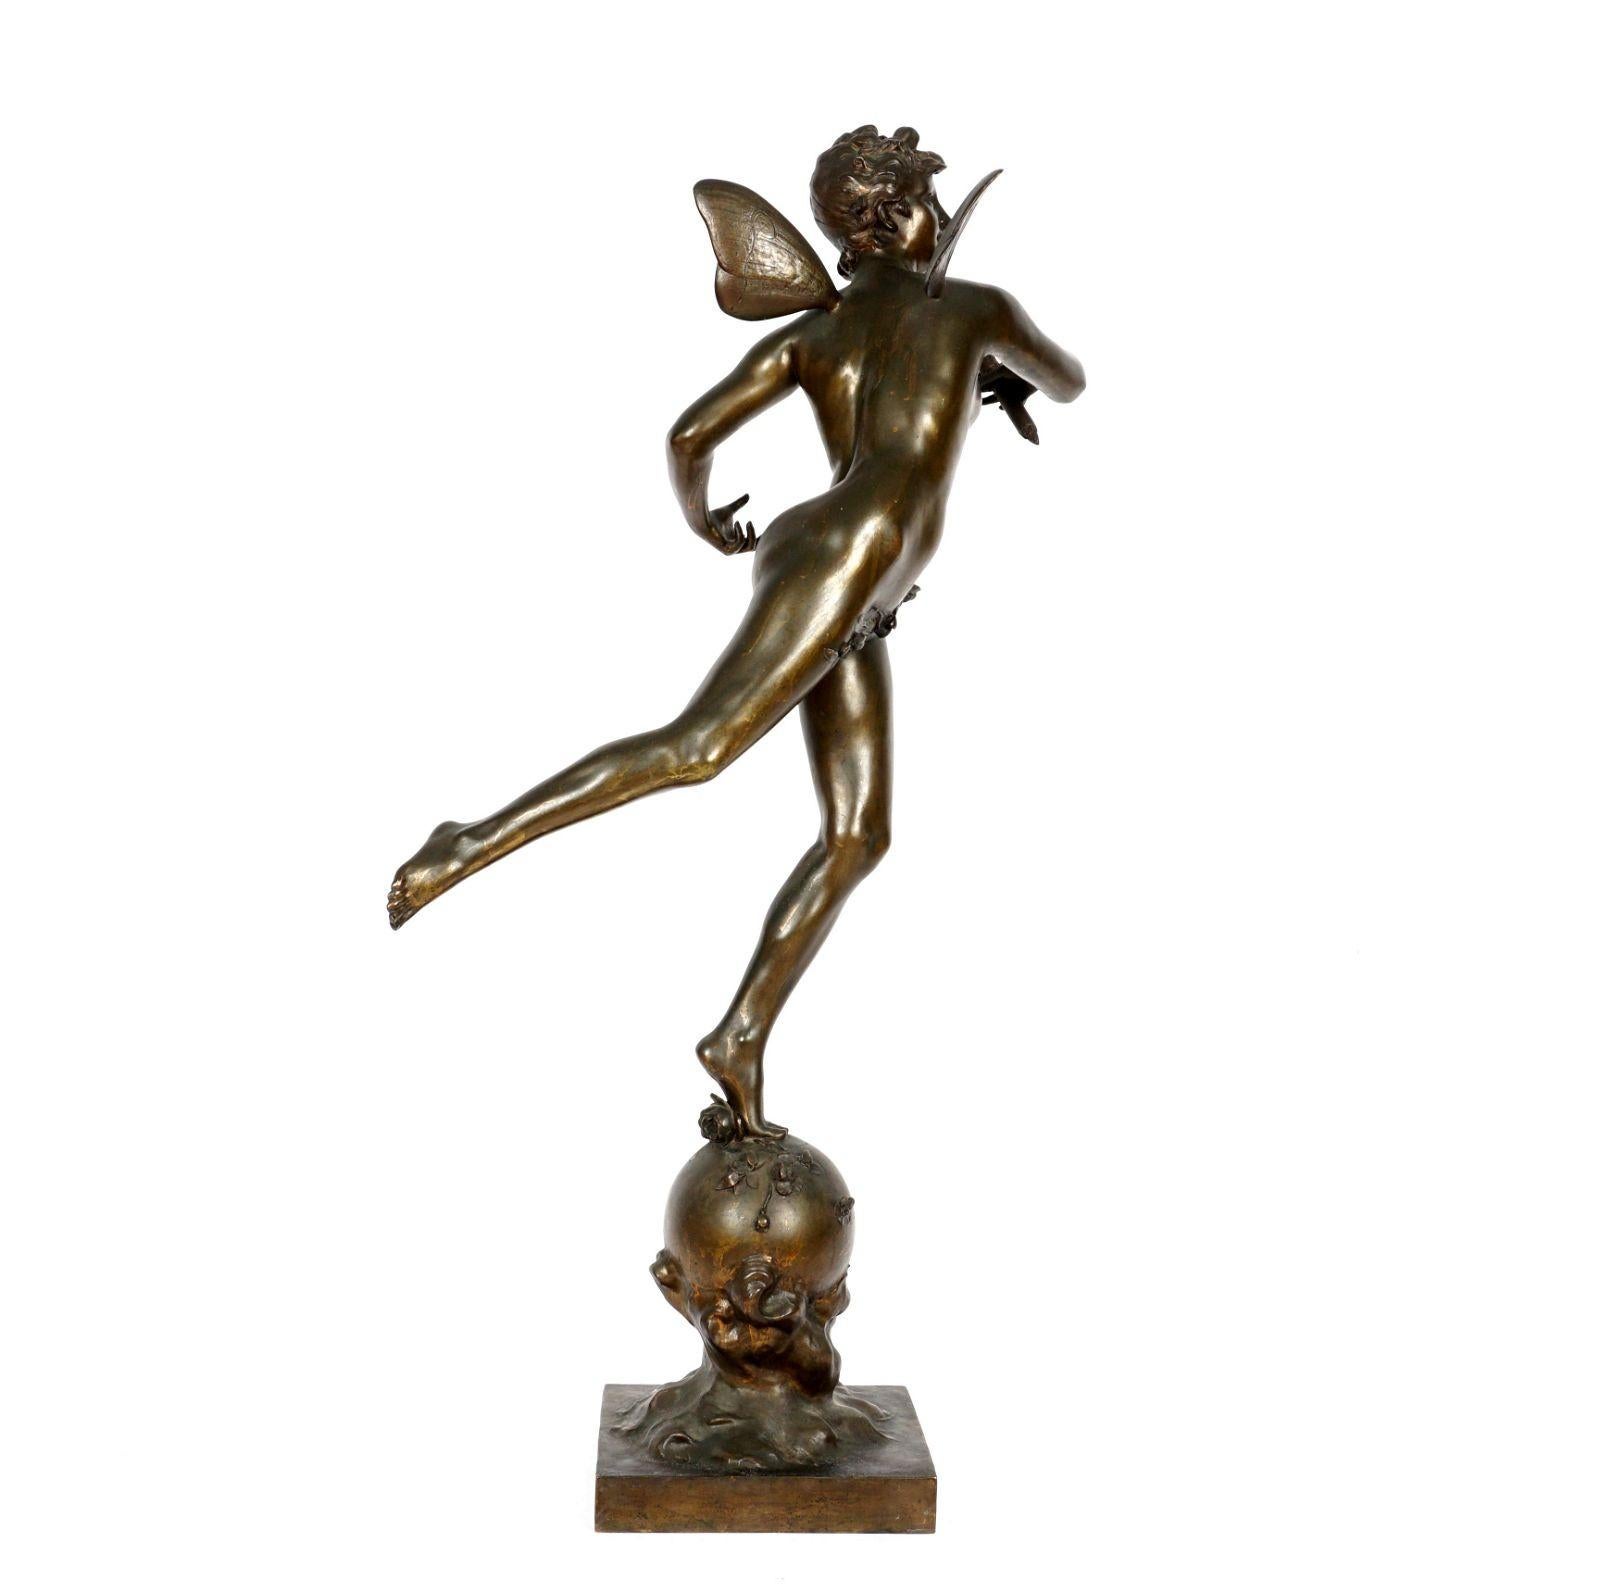 Large (41 inch tall) patinated bronze sculpture of a fairy with sceptre standing upon a globe after the French sculptor, Michel Leonard Beguine (1855-1929).